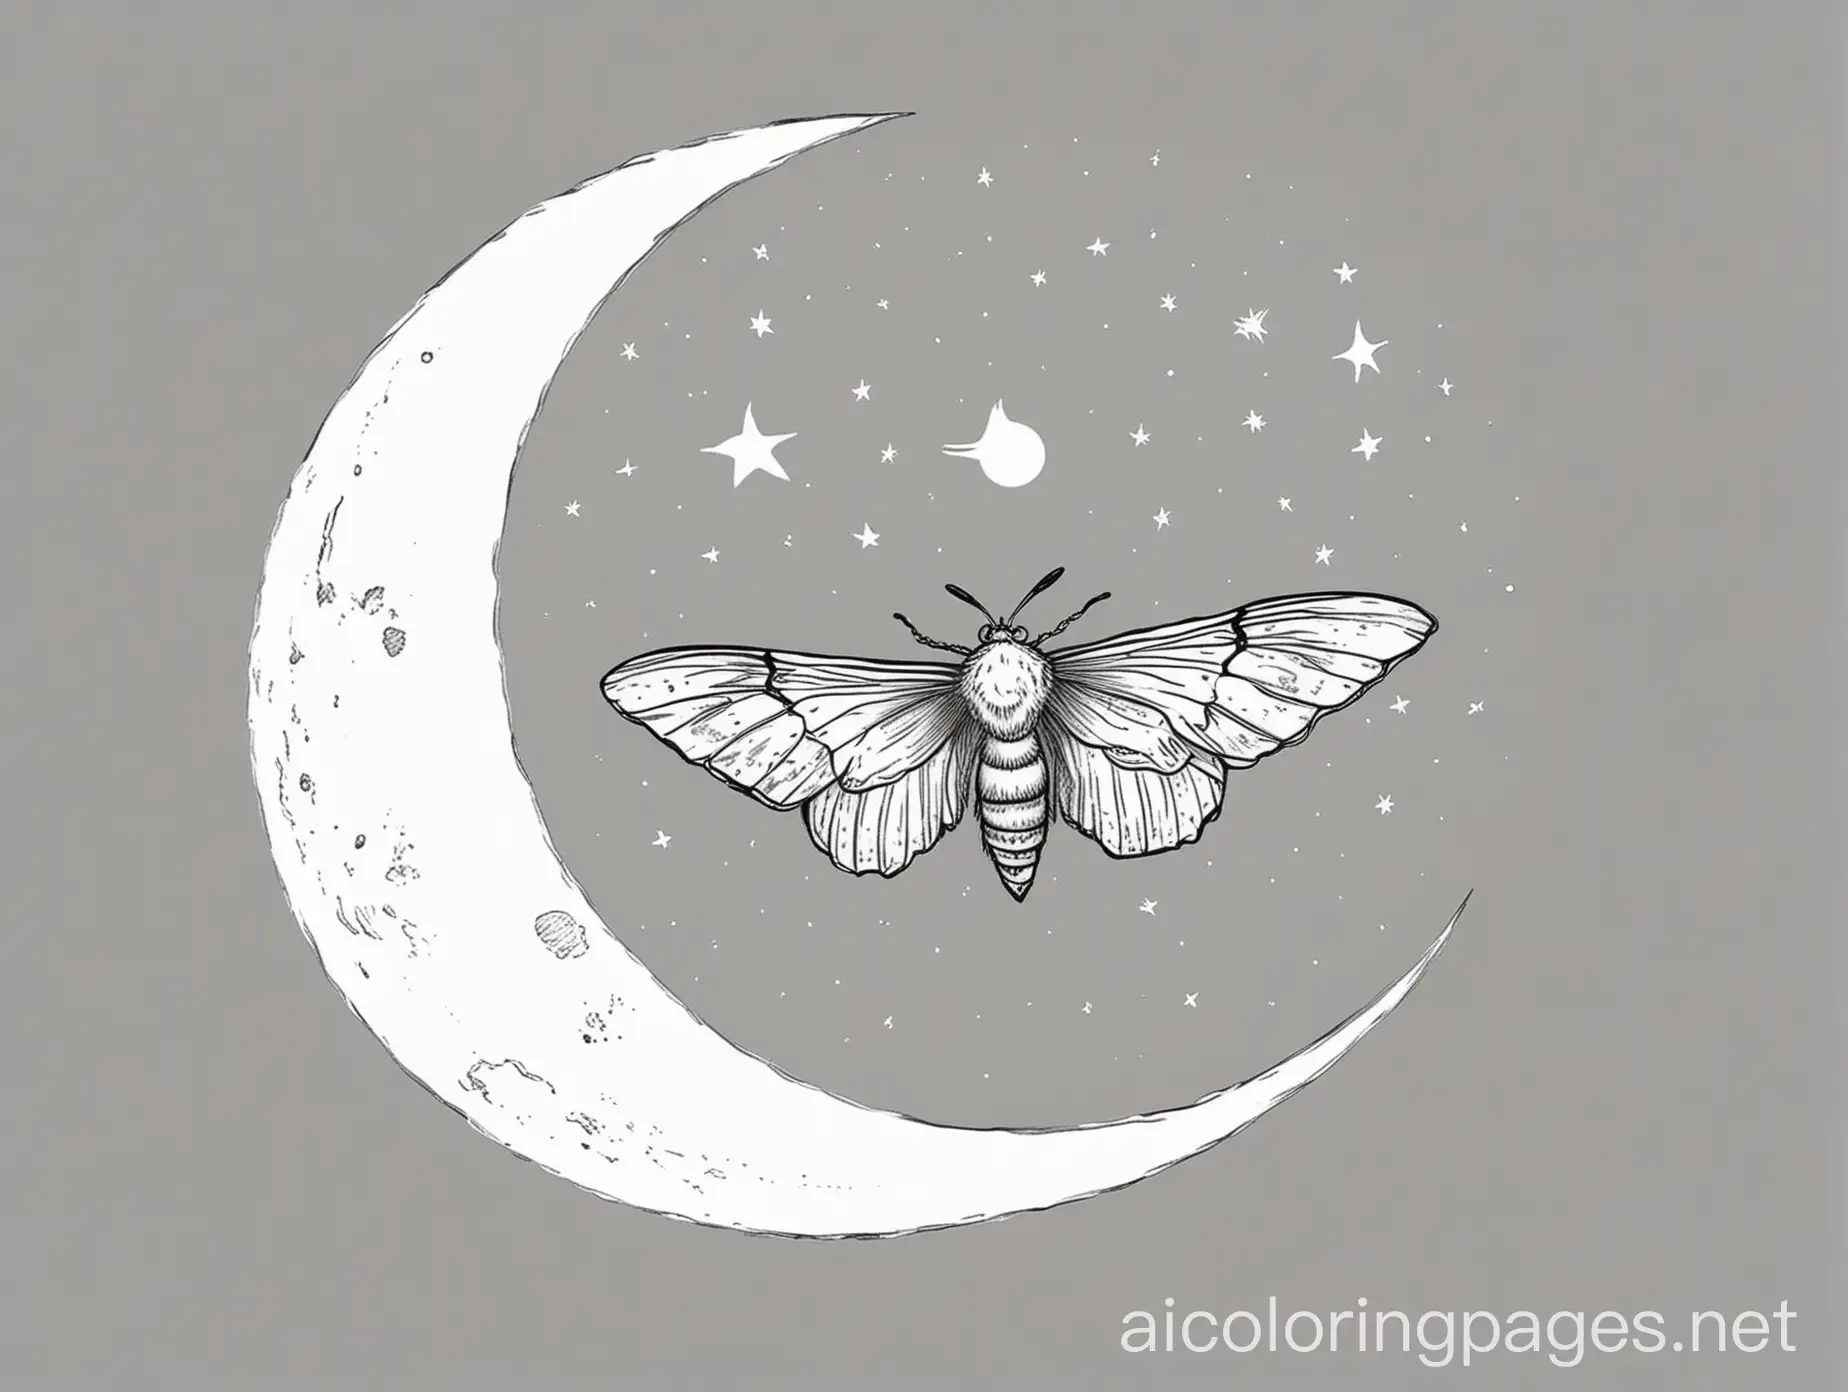  moth flying to a crescent moon, Coloring Page, black and white, line art, white background, Simplicity, Ample White Space. The background of the coloring page is plain white to make it easy for young children to color within the lines. The outlines of all the subjects are easy to distinguish, making it simple for kids to color without too much difficulty